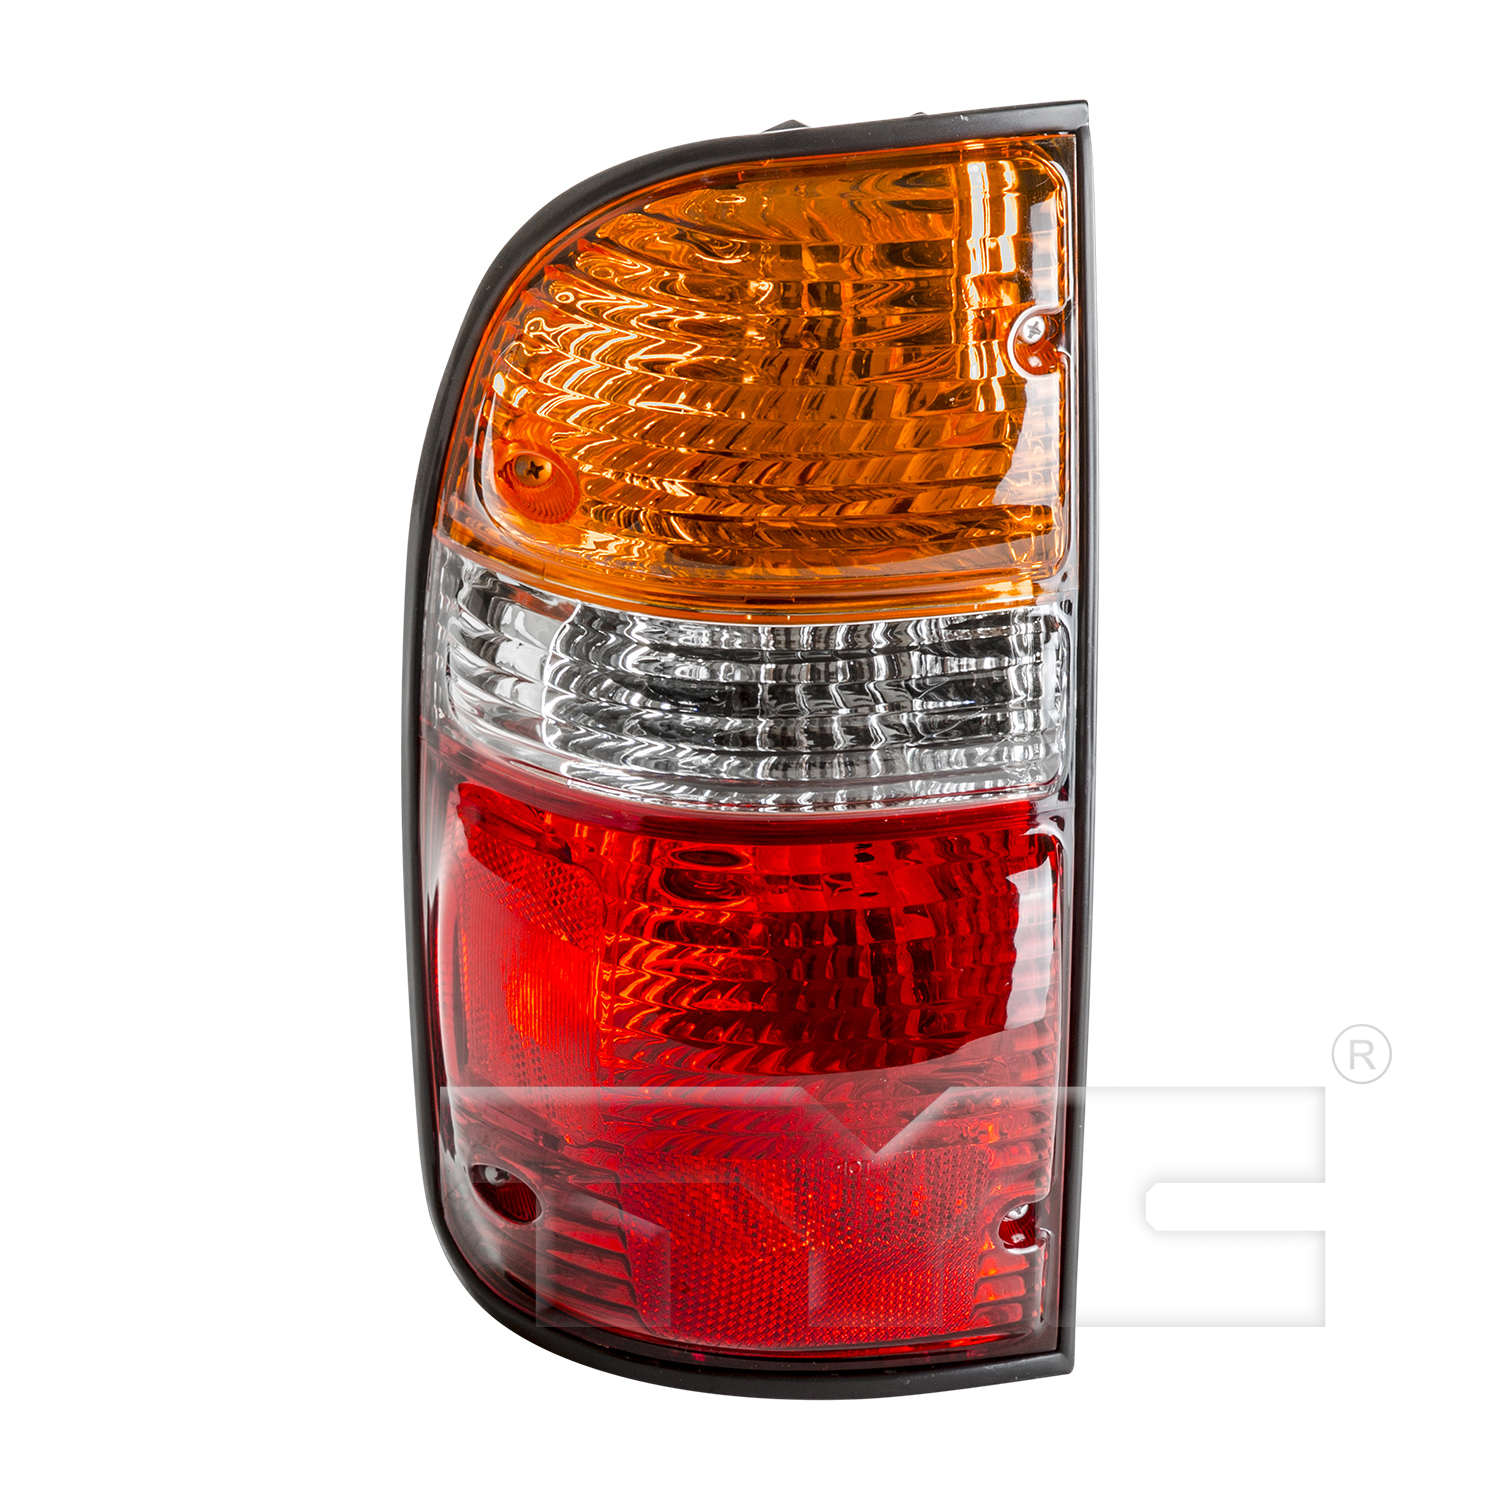 Aftermarket TAILLIGHTS for TOYOTA - TACOMA, TACOMA,01-04,LT Taillamp assy